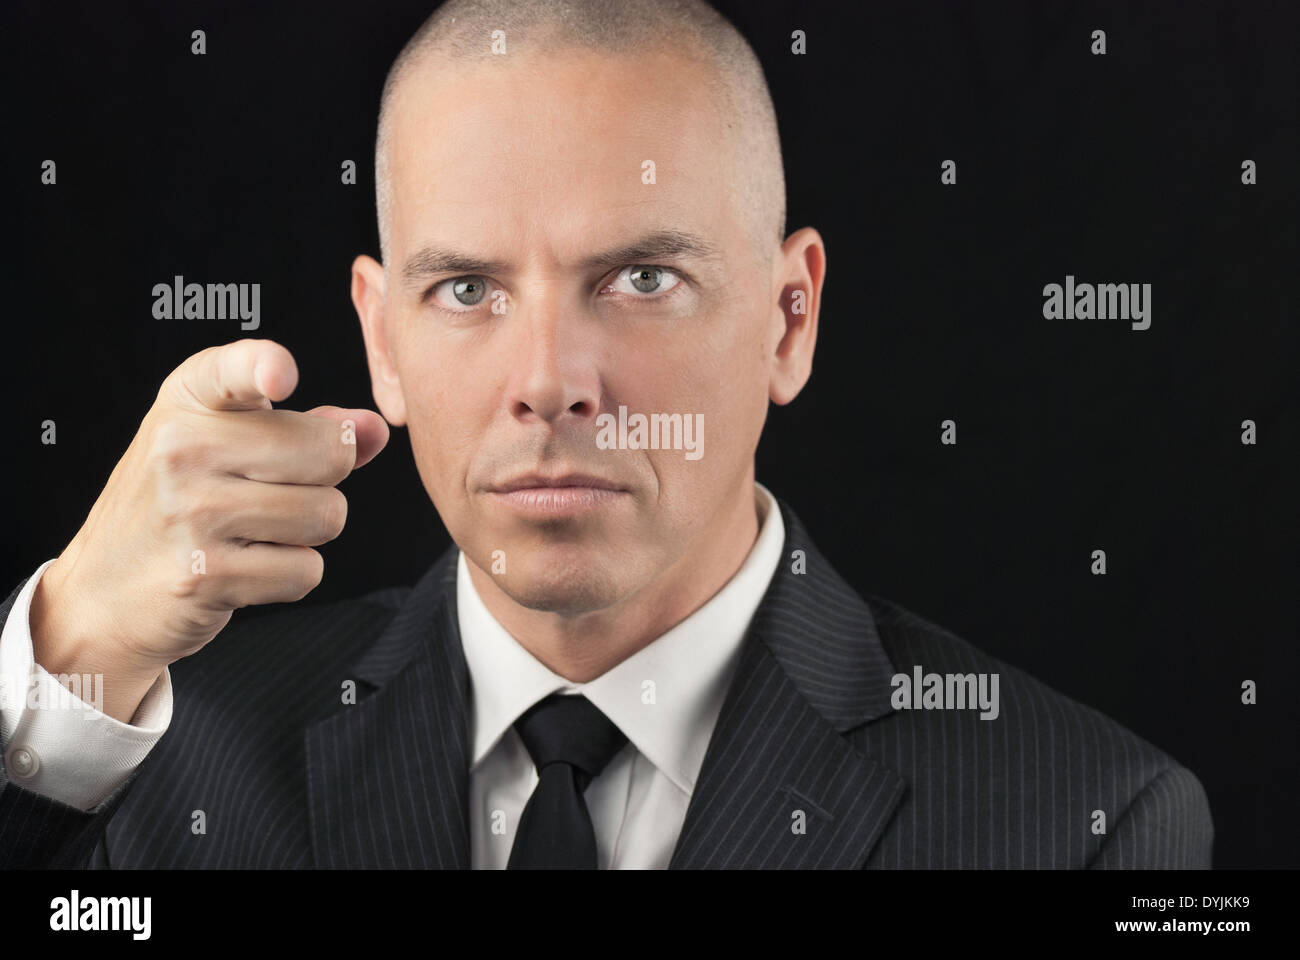 Close-up of an intense bald man pointing to camera. Stock Photo